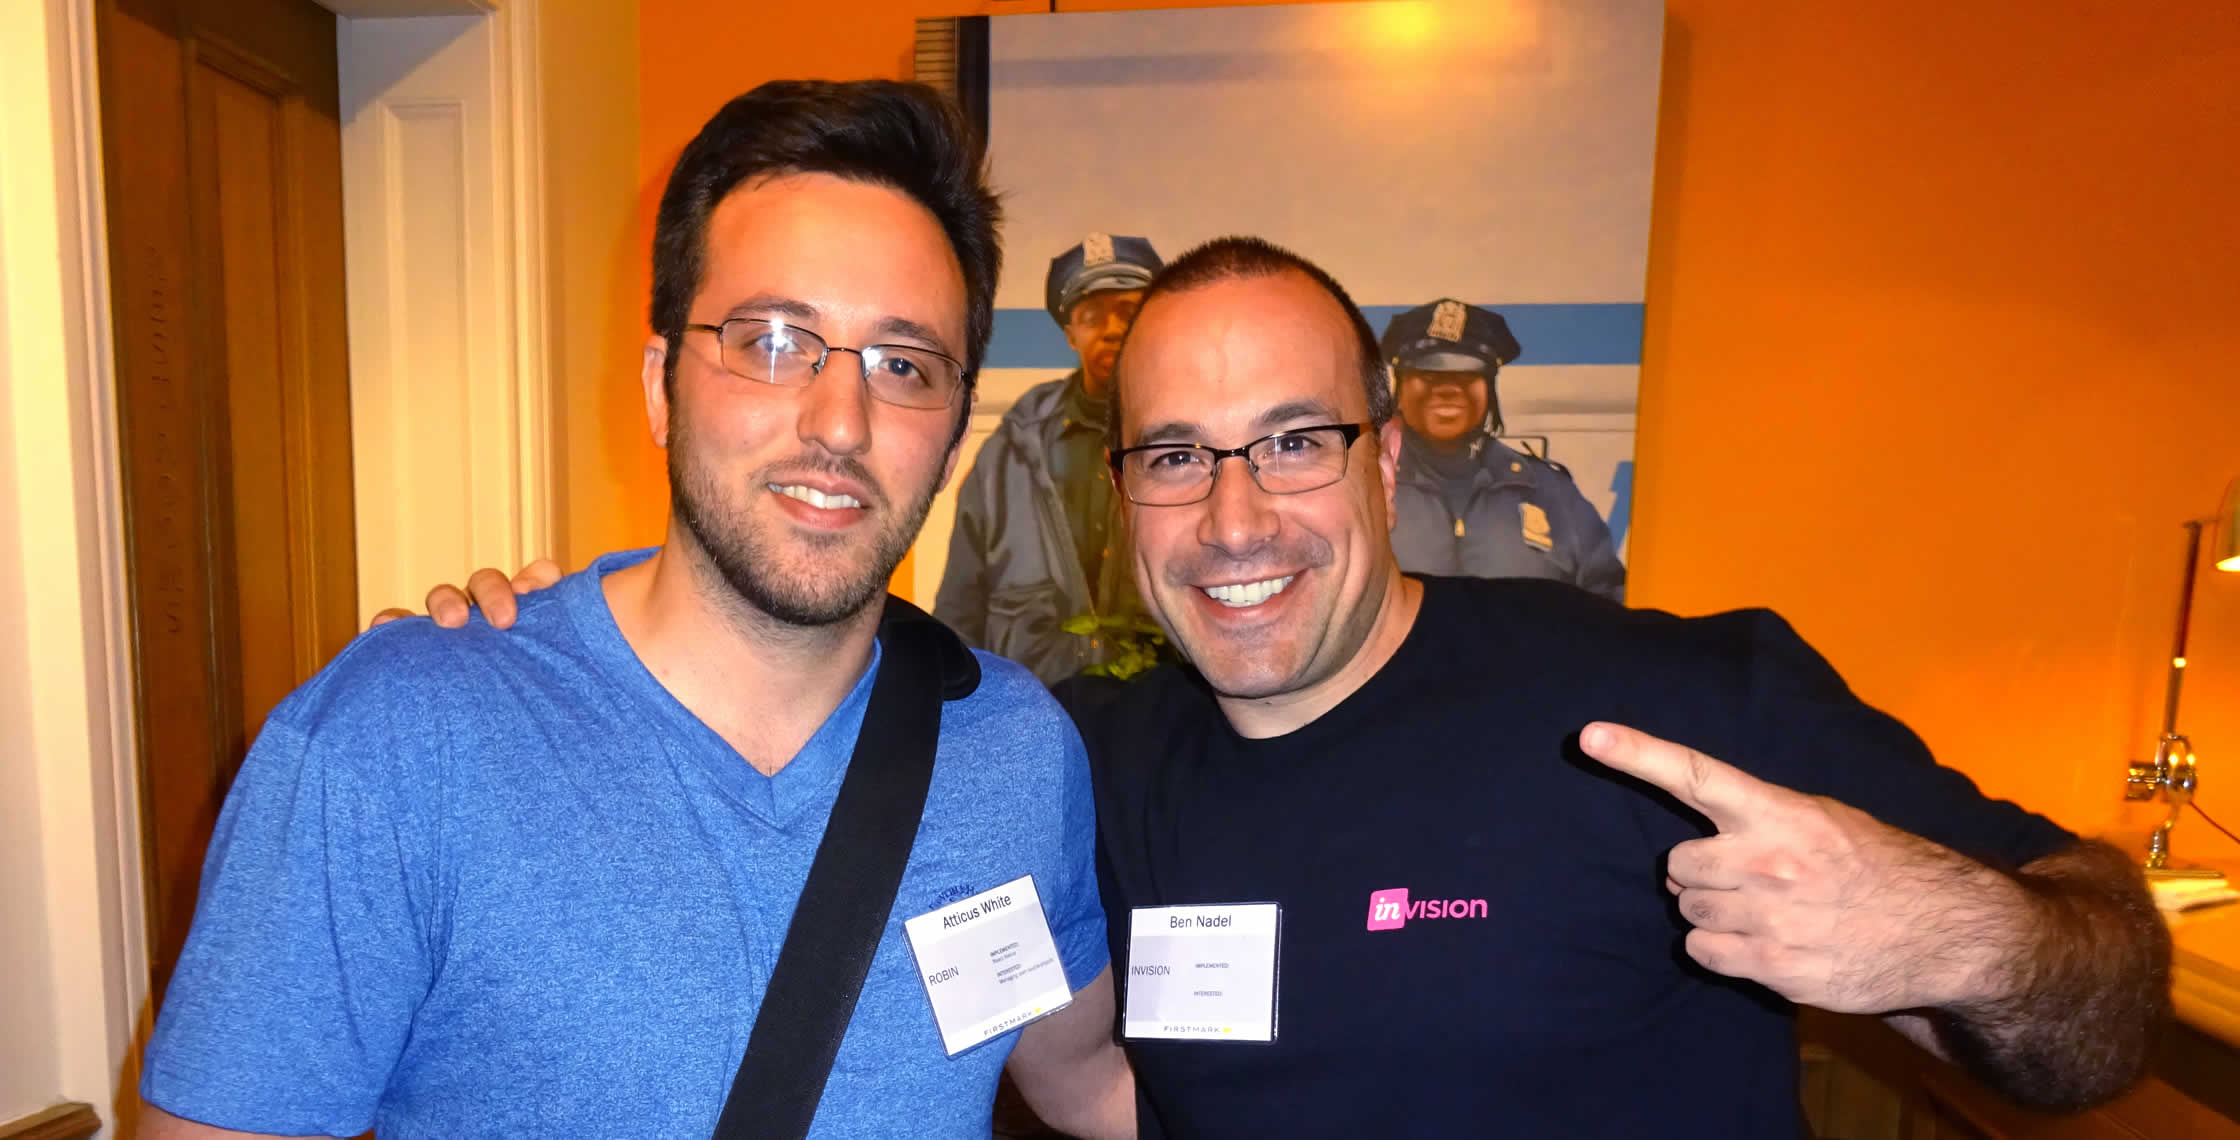 Ben Nadel at FirstMark Tech Summit (New York, NY) with: Atticus White